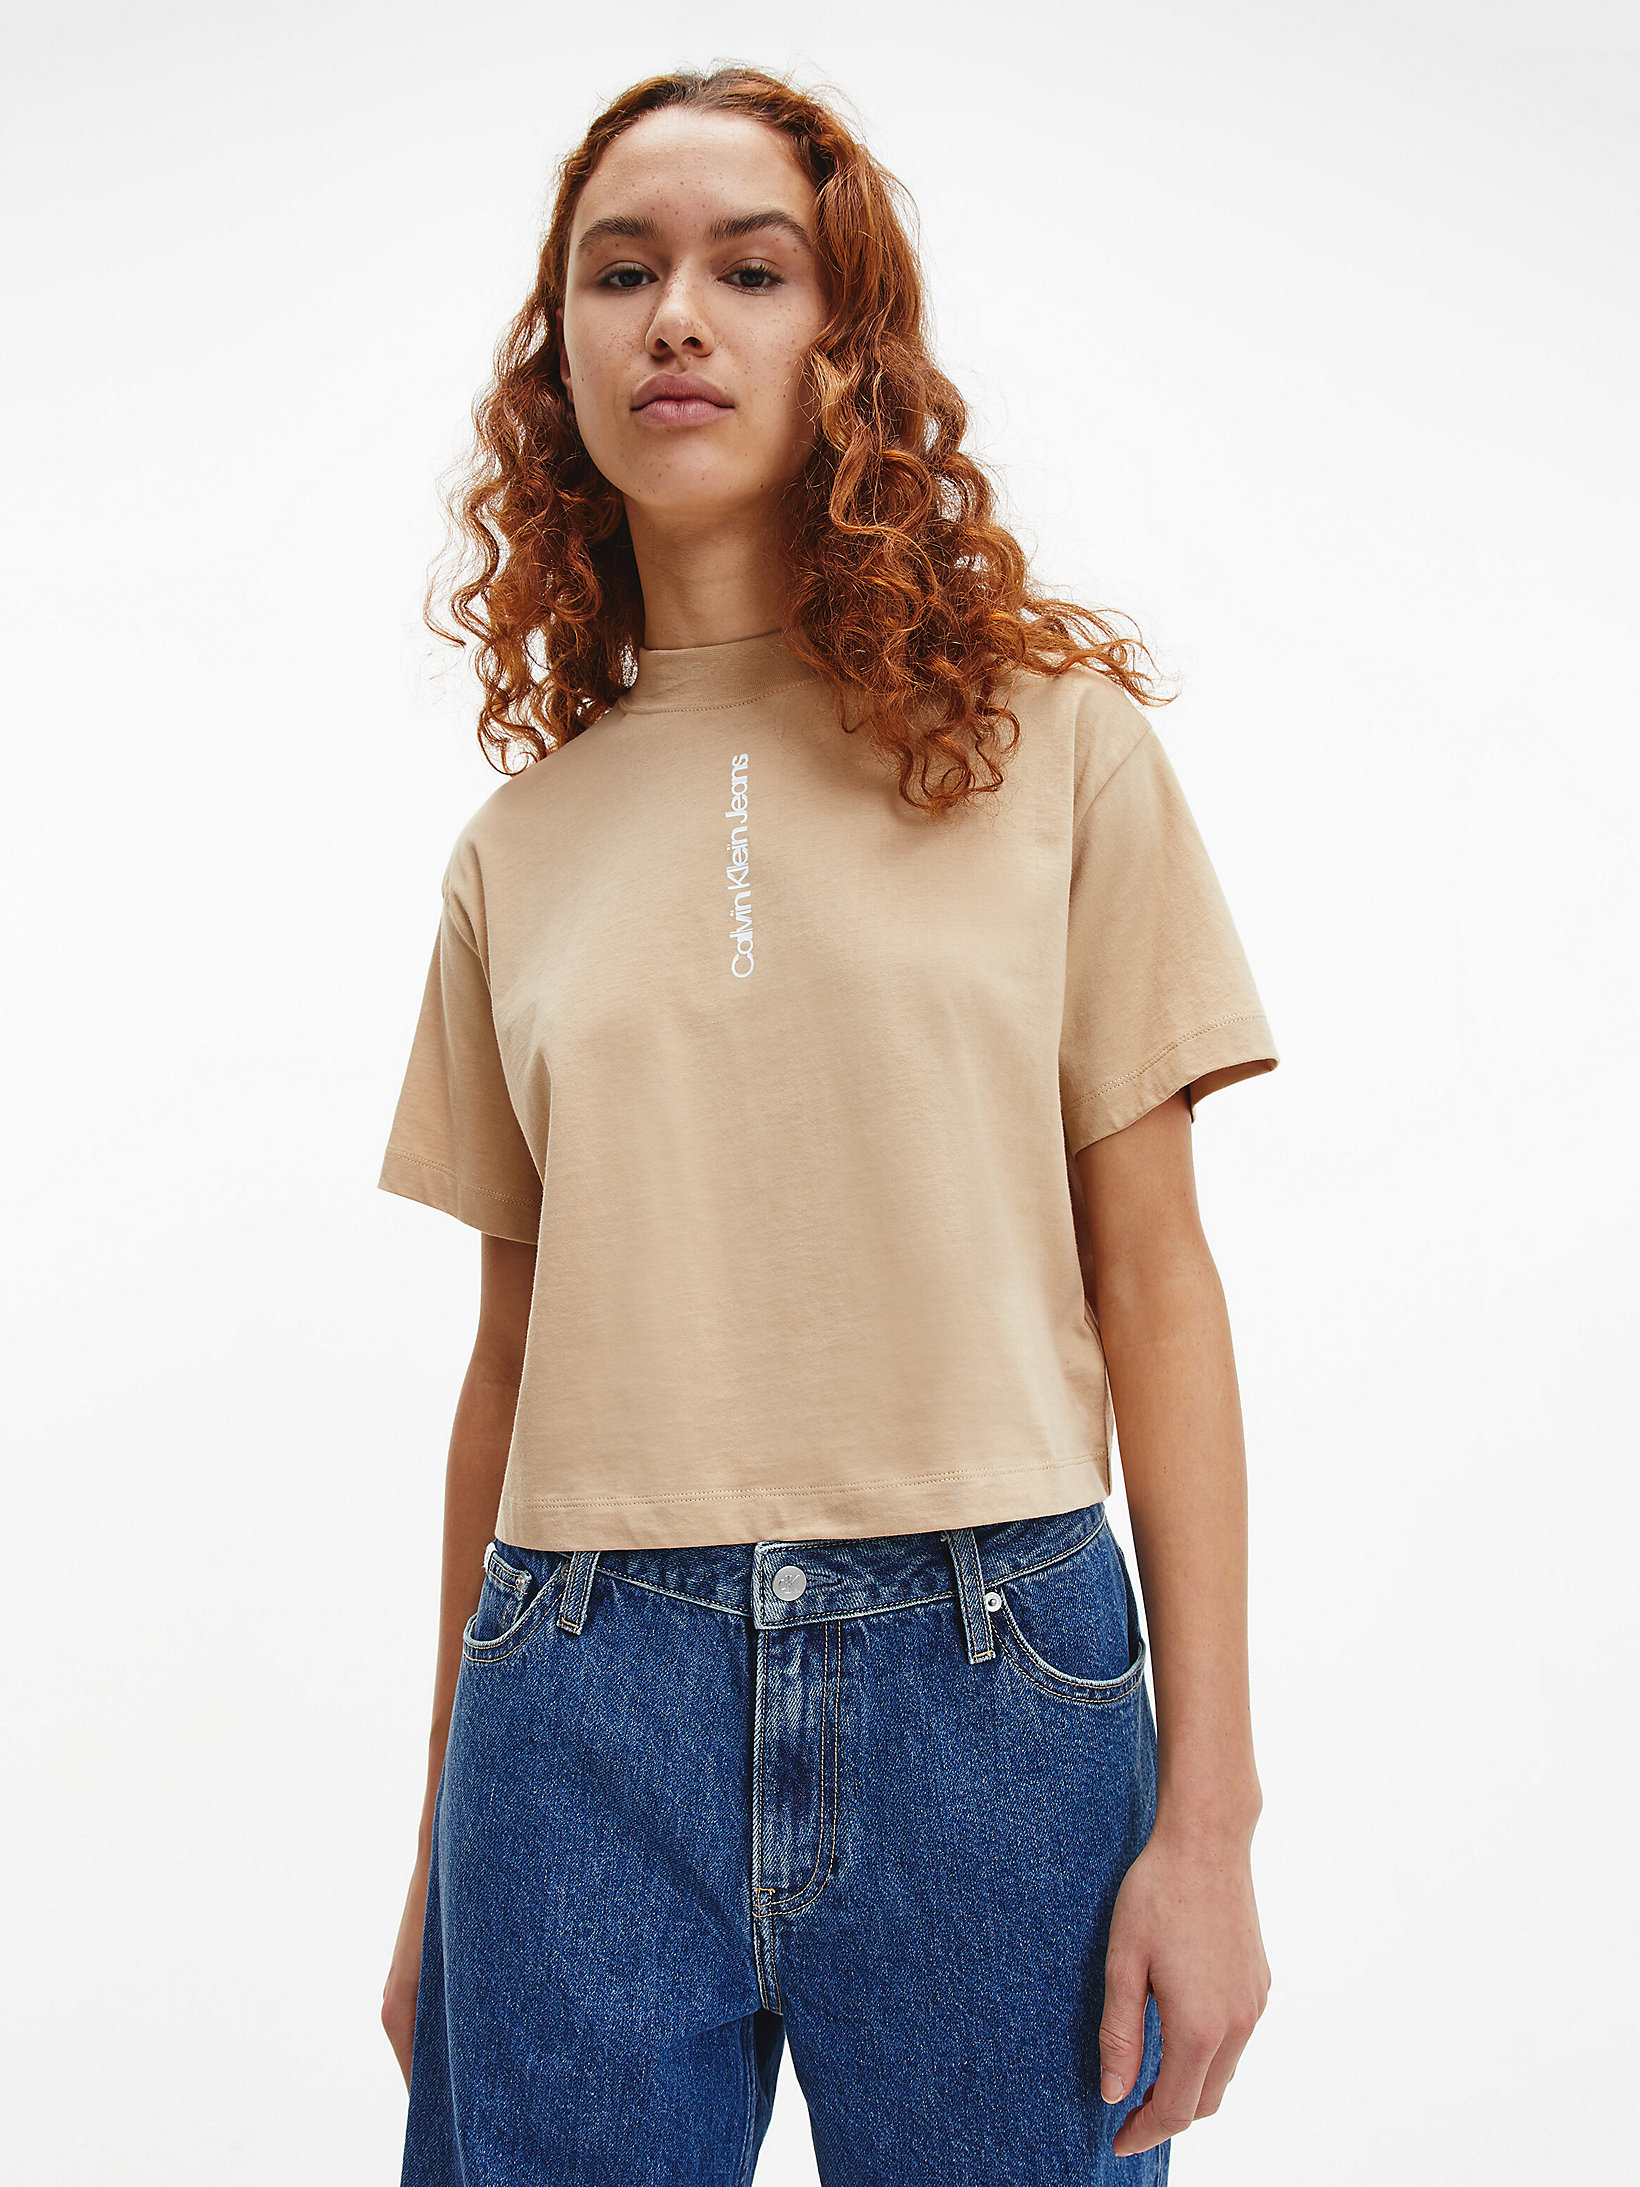 Tawny Sand T-Shirt Con Logo In Cotone Biologico Taglio Relaxed undefined donna Calvin Klein